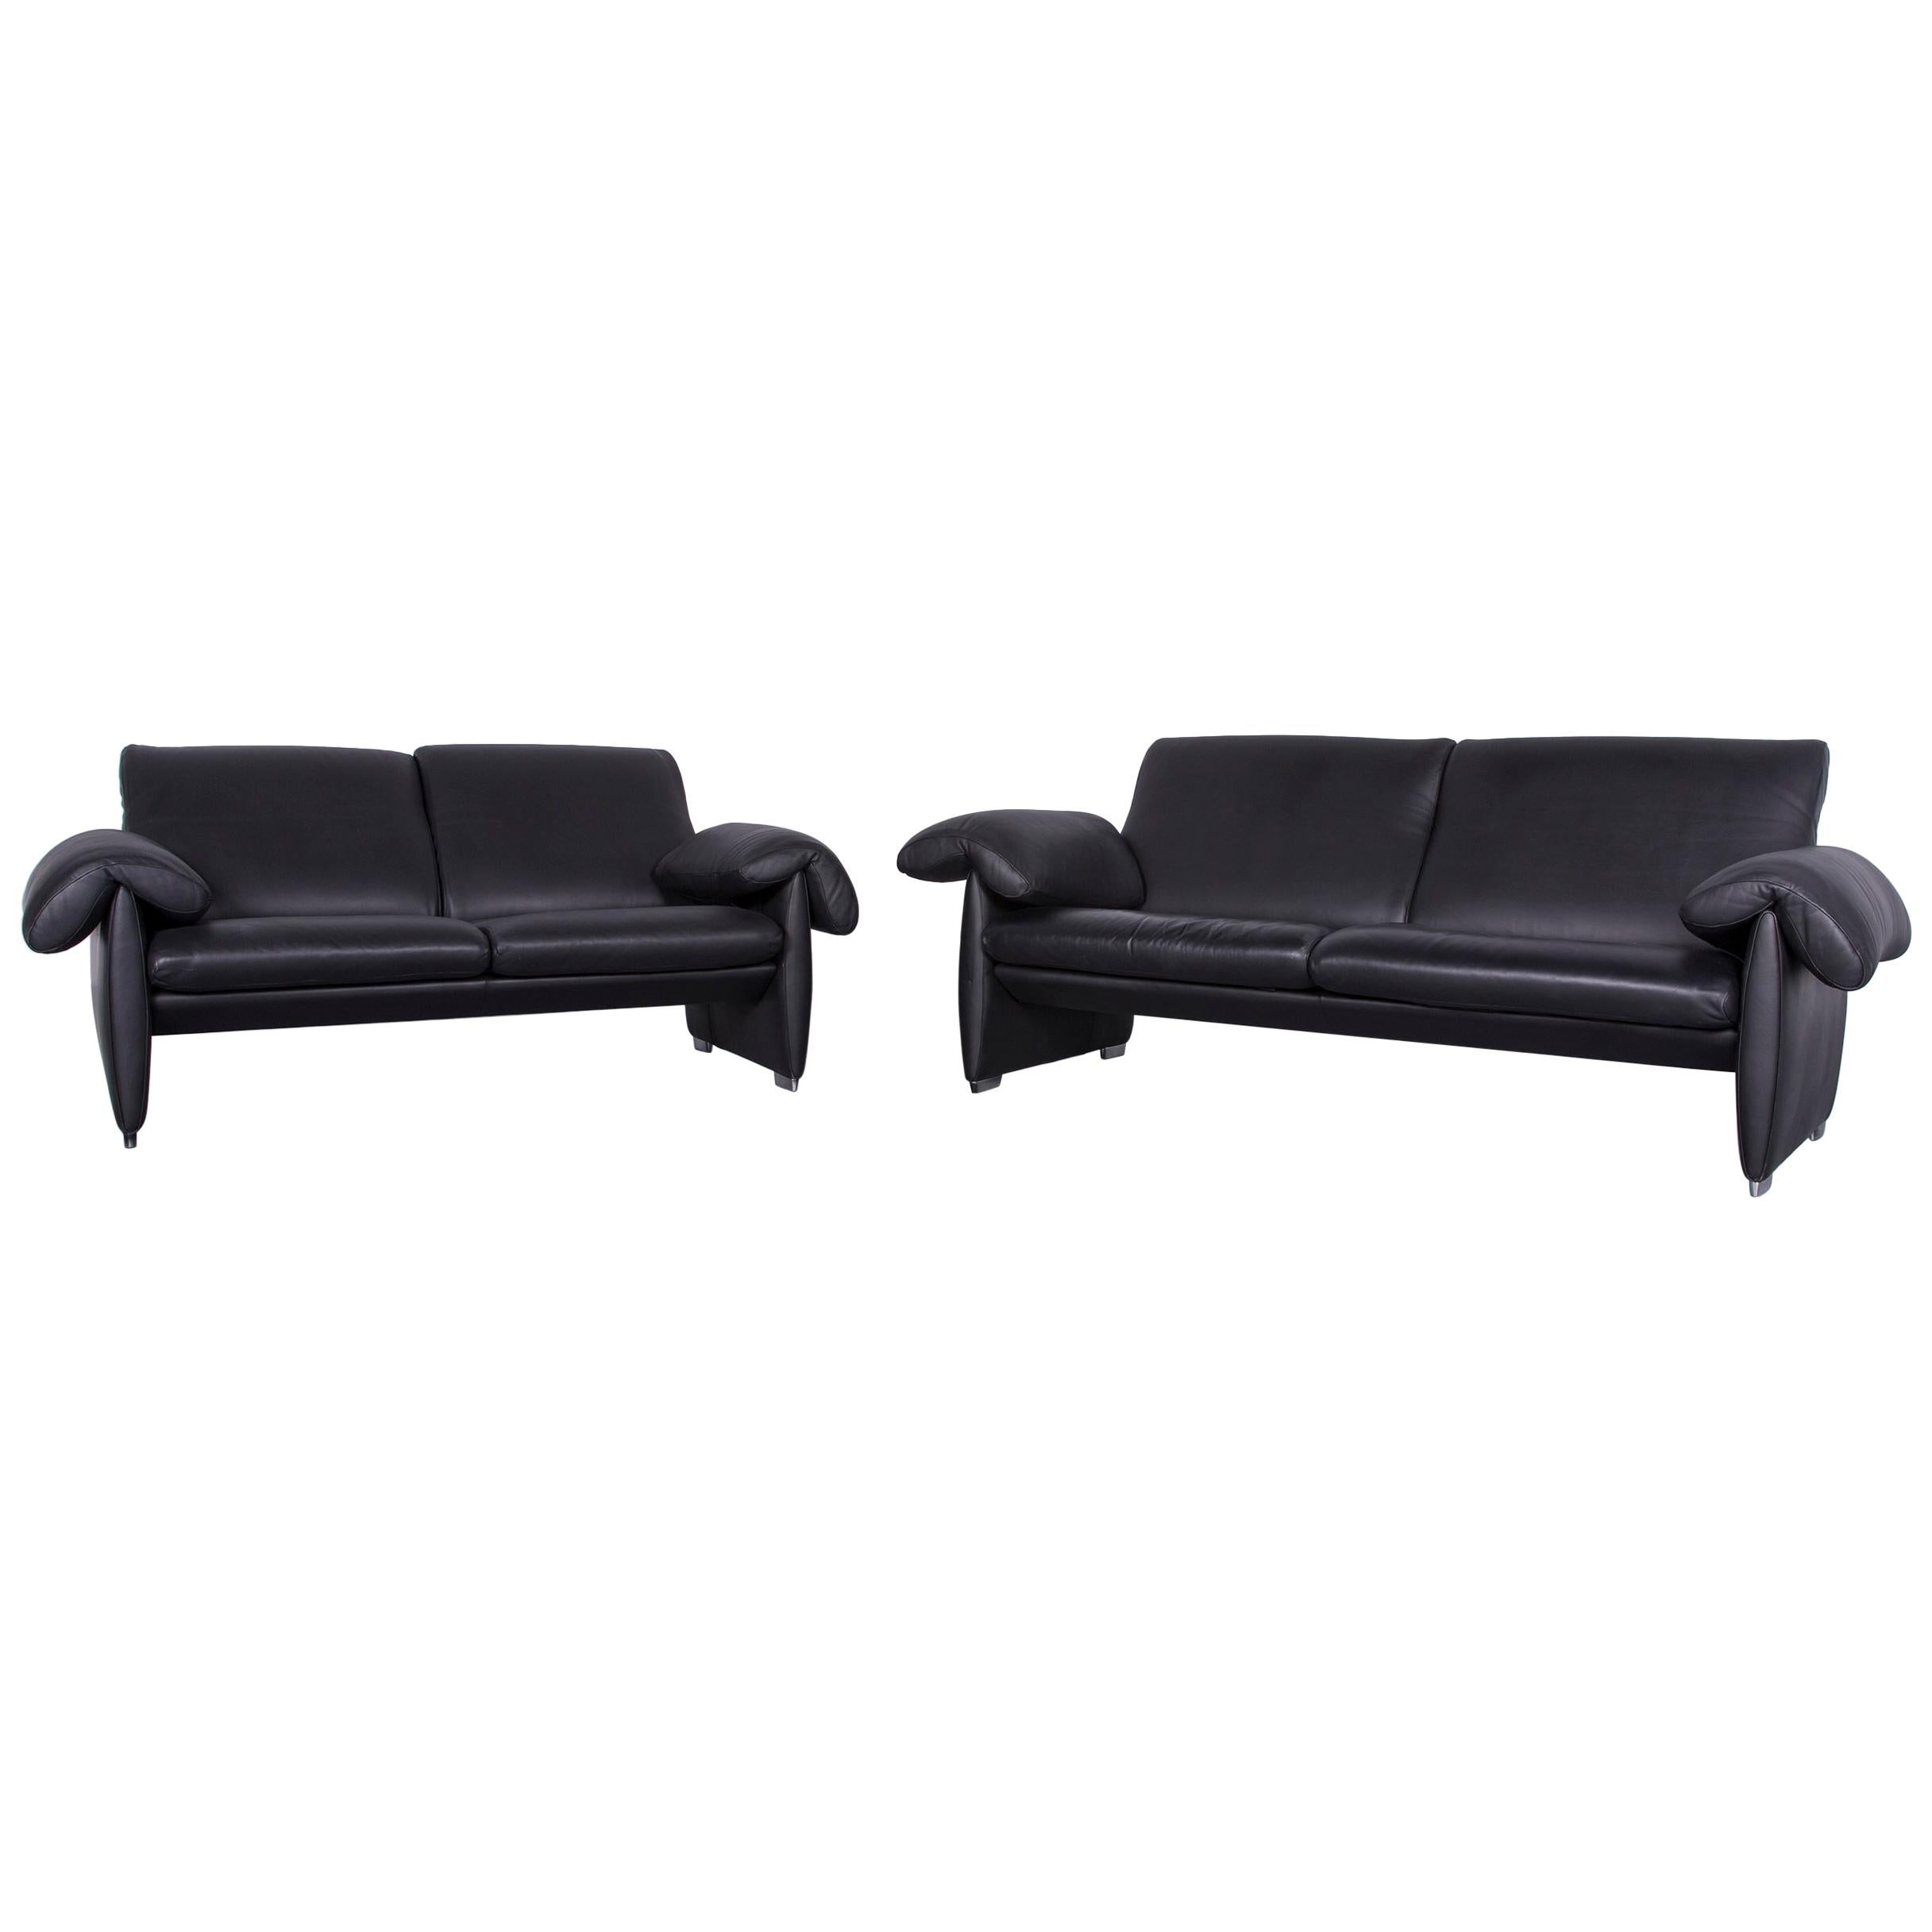 De Sede DS 10 Designer Sofa Black Leather Three-Seat Two-Seat Set Couch